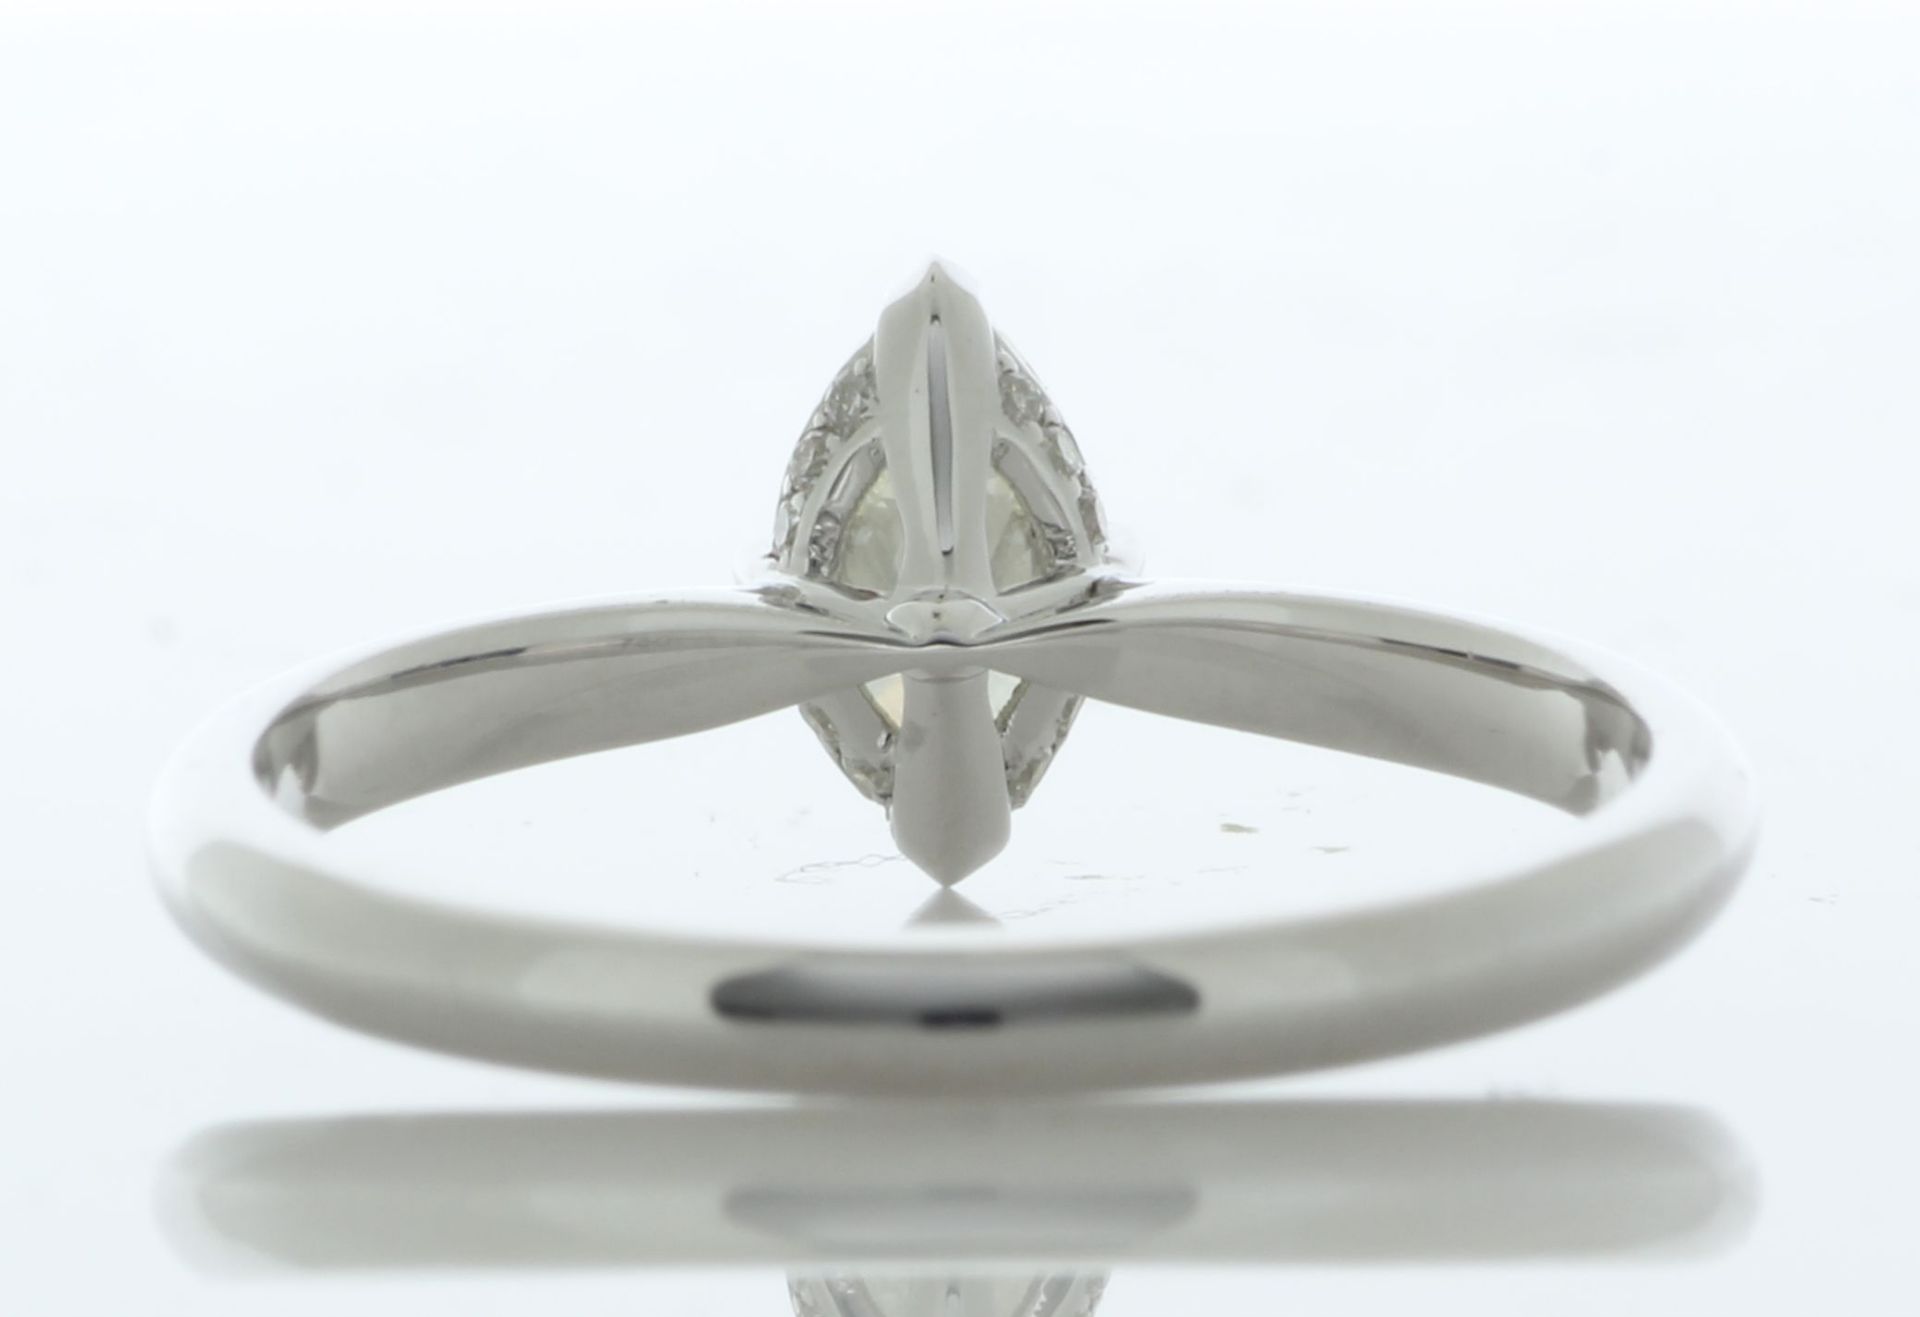 18ct White Gold Single Stone Marquise Cut Diamond Ring (0.52) 0.56 Carats - Valued By GIE £7,840. - Image 4 of 5